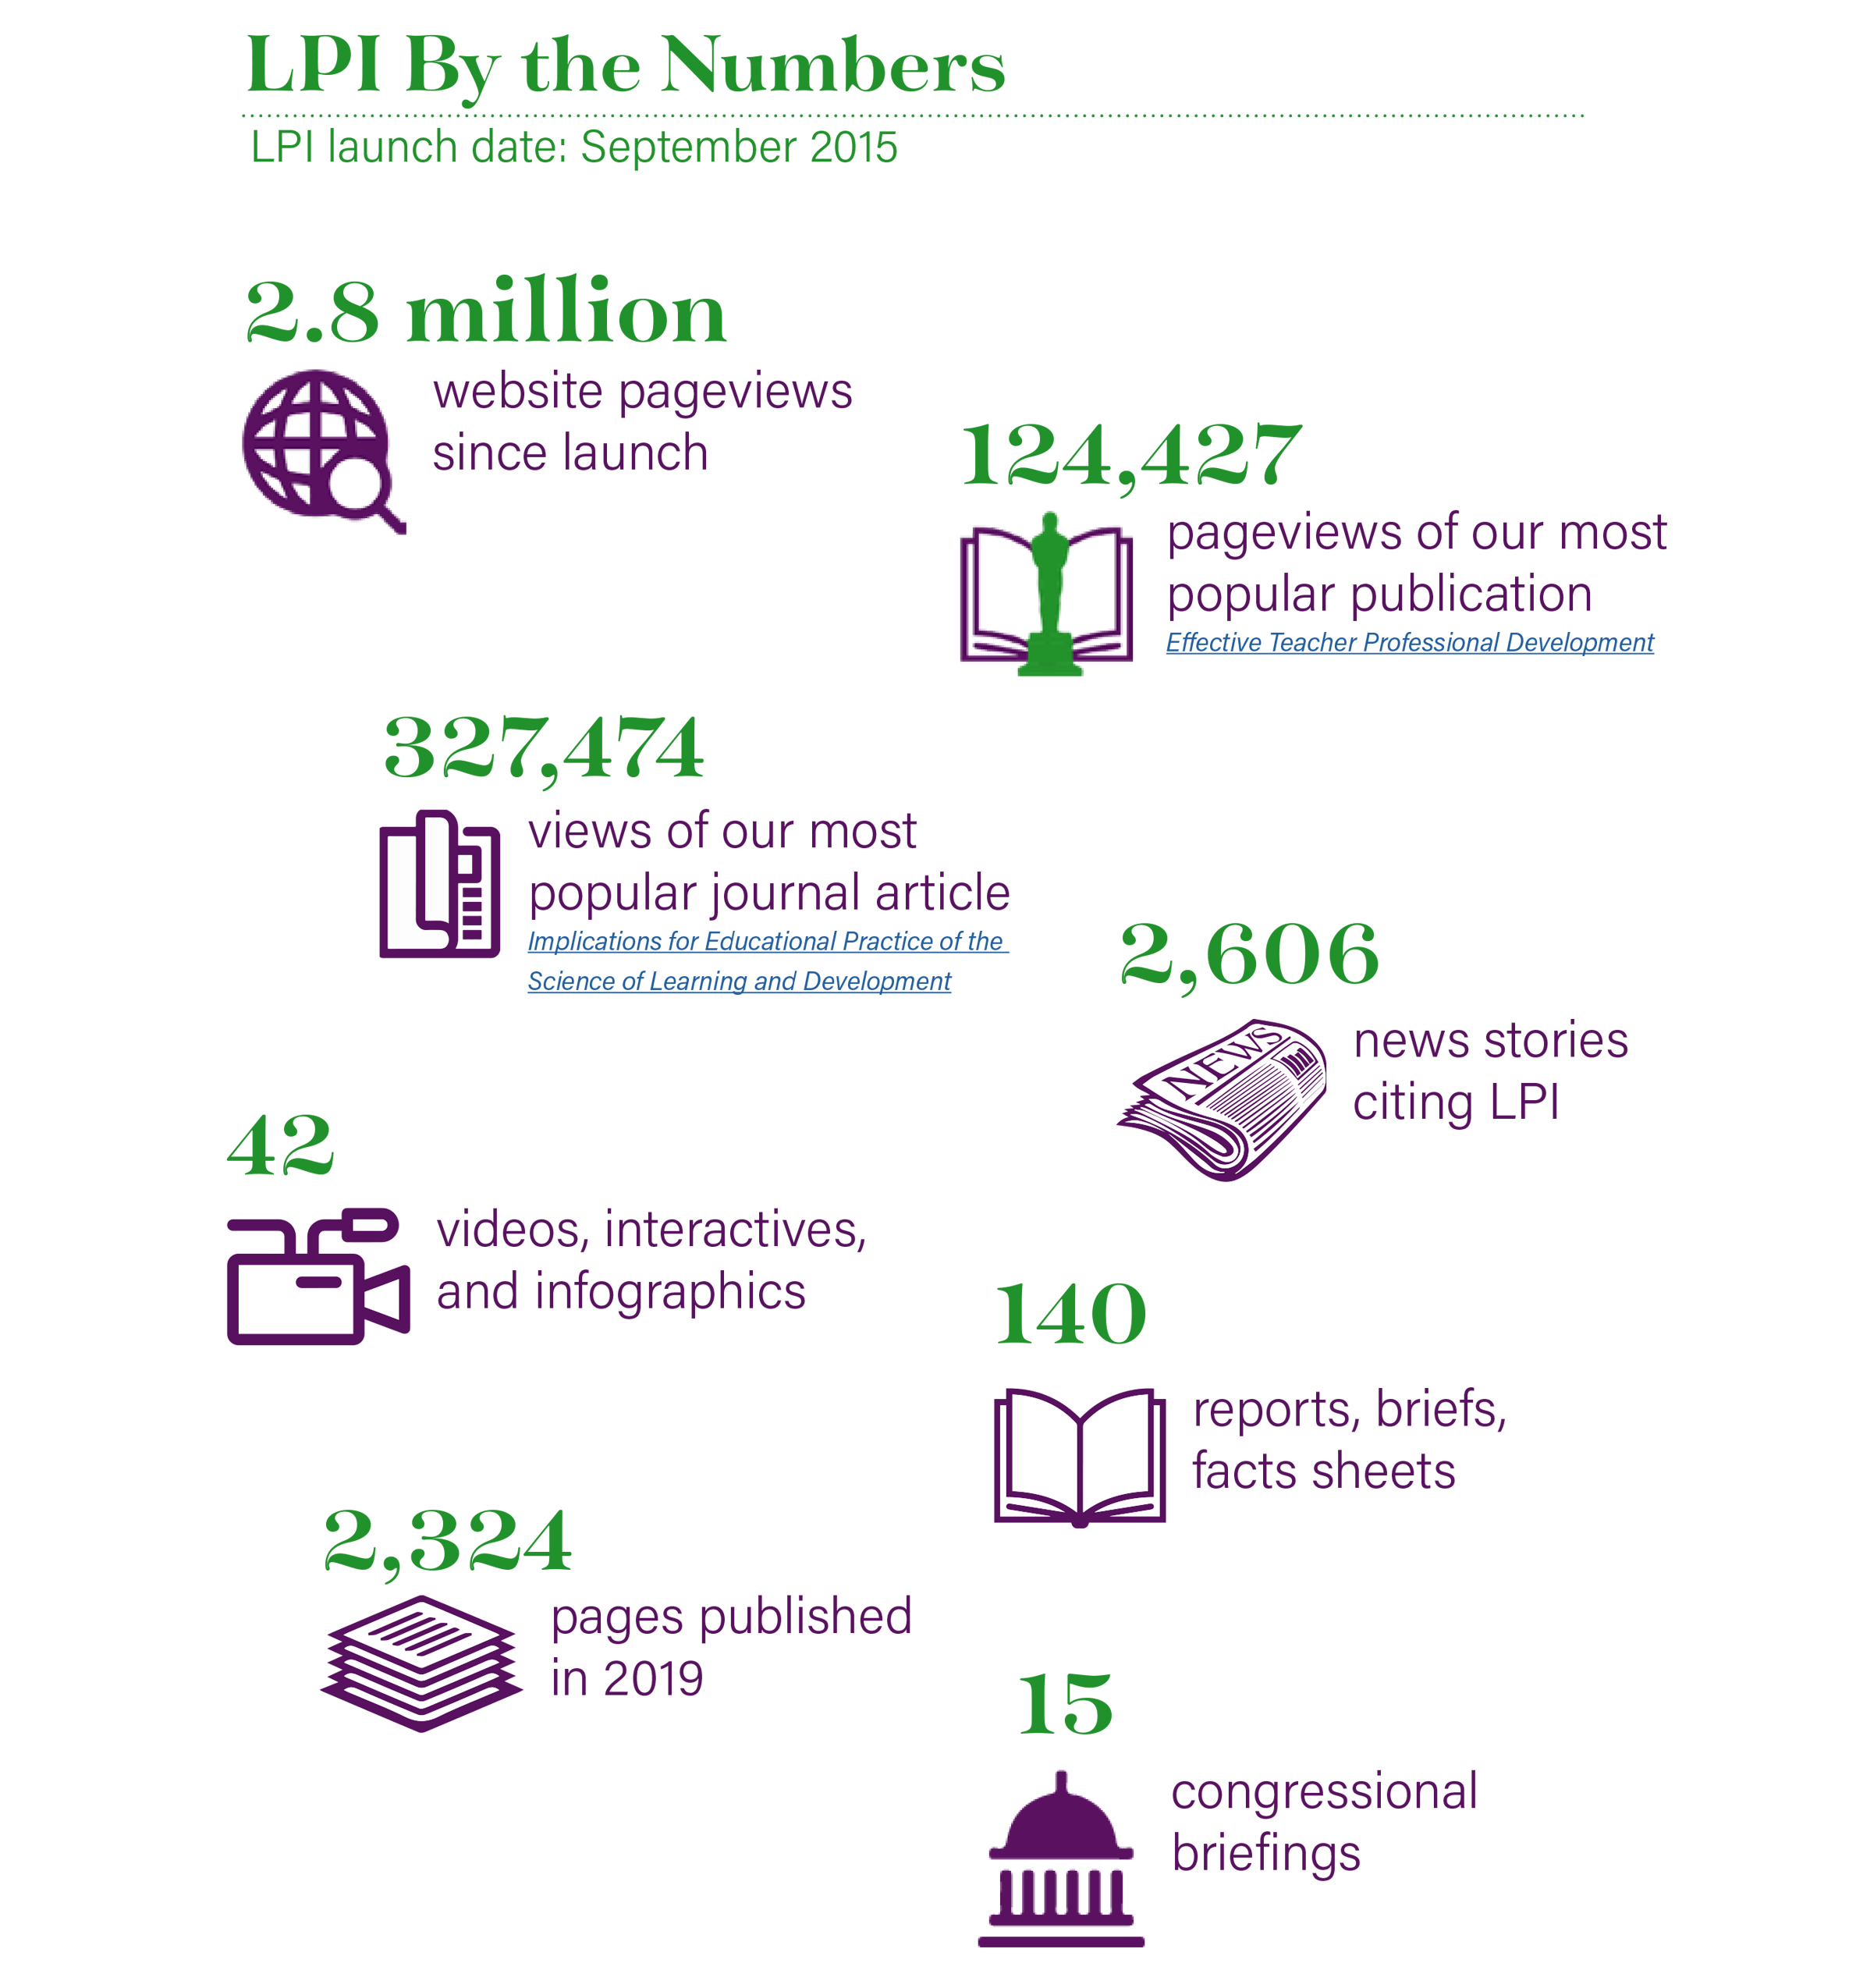 LPI By the Numbers infographic